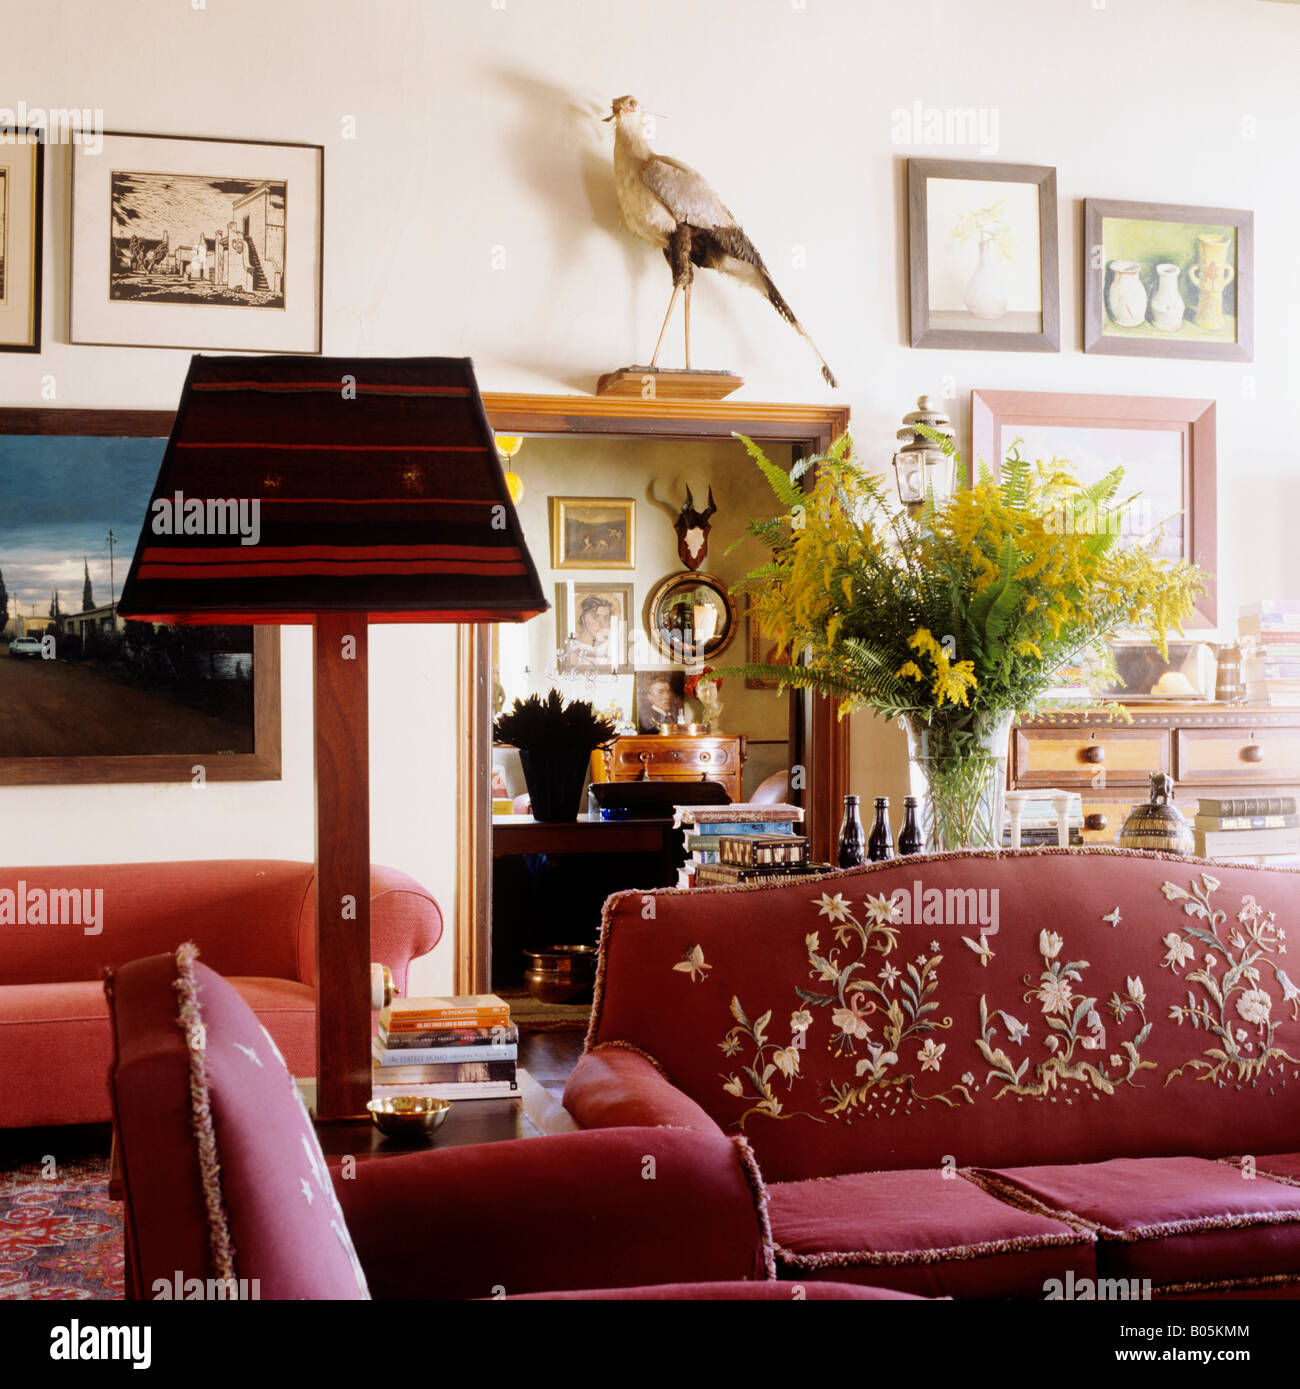 Sitting room with embroidered red sofa and an eclectic range of historic objects Stock Photo